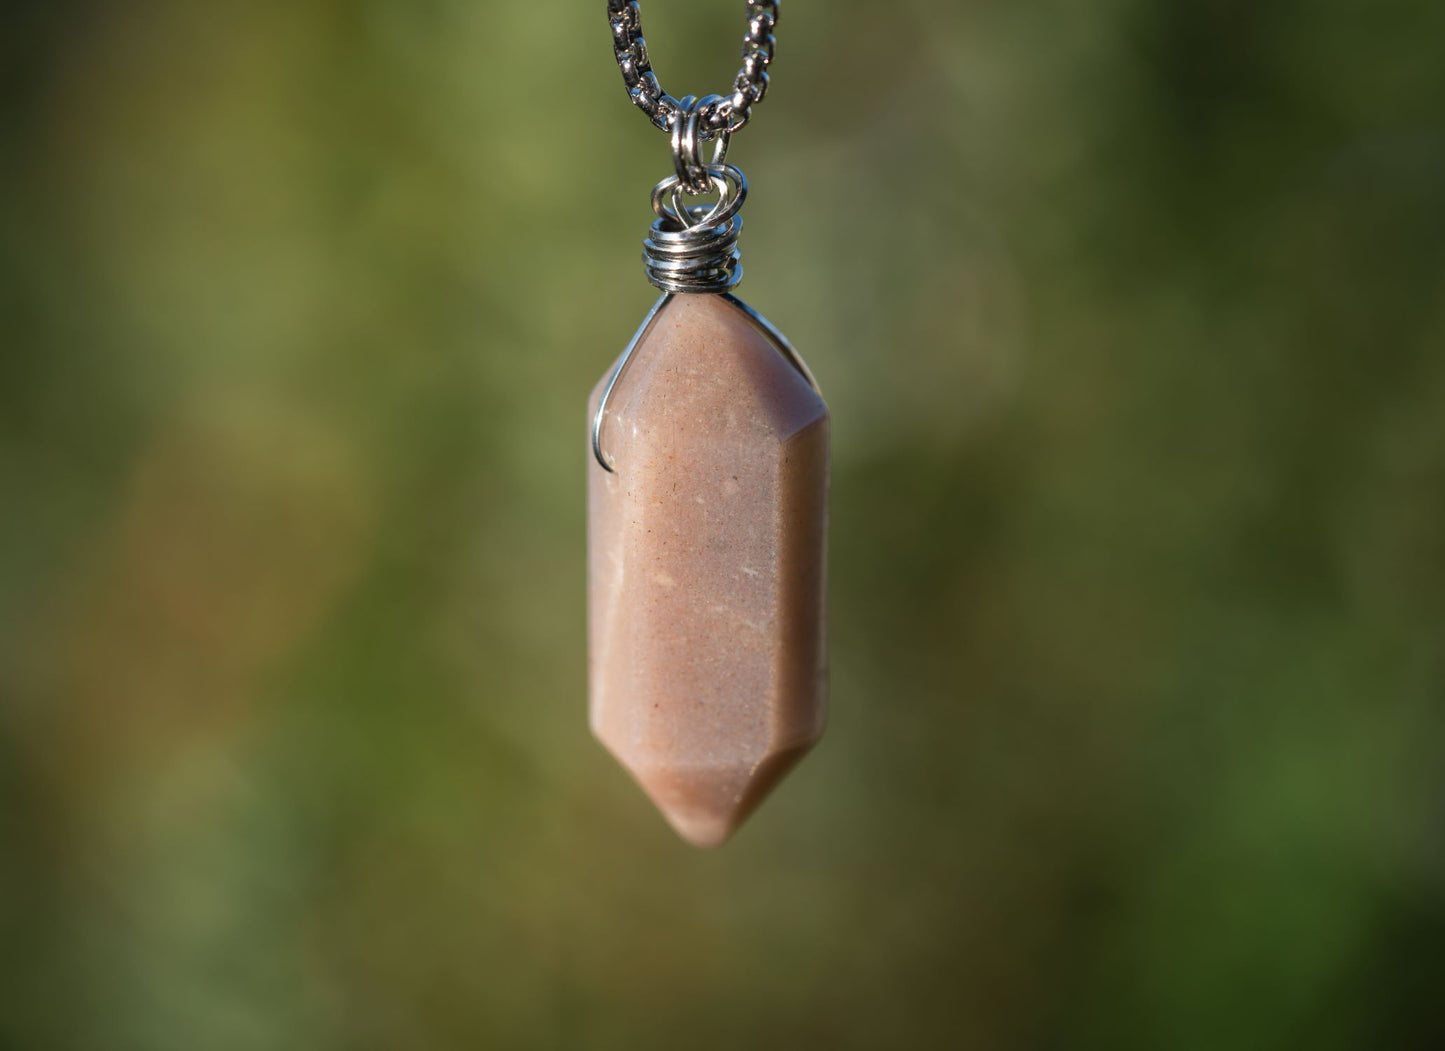 'Be Gentle With Yourself' Double Terminated Peach Moonstone Stainless Steel Necklace